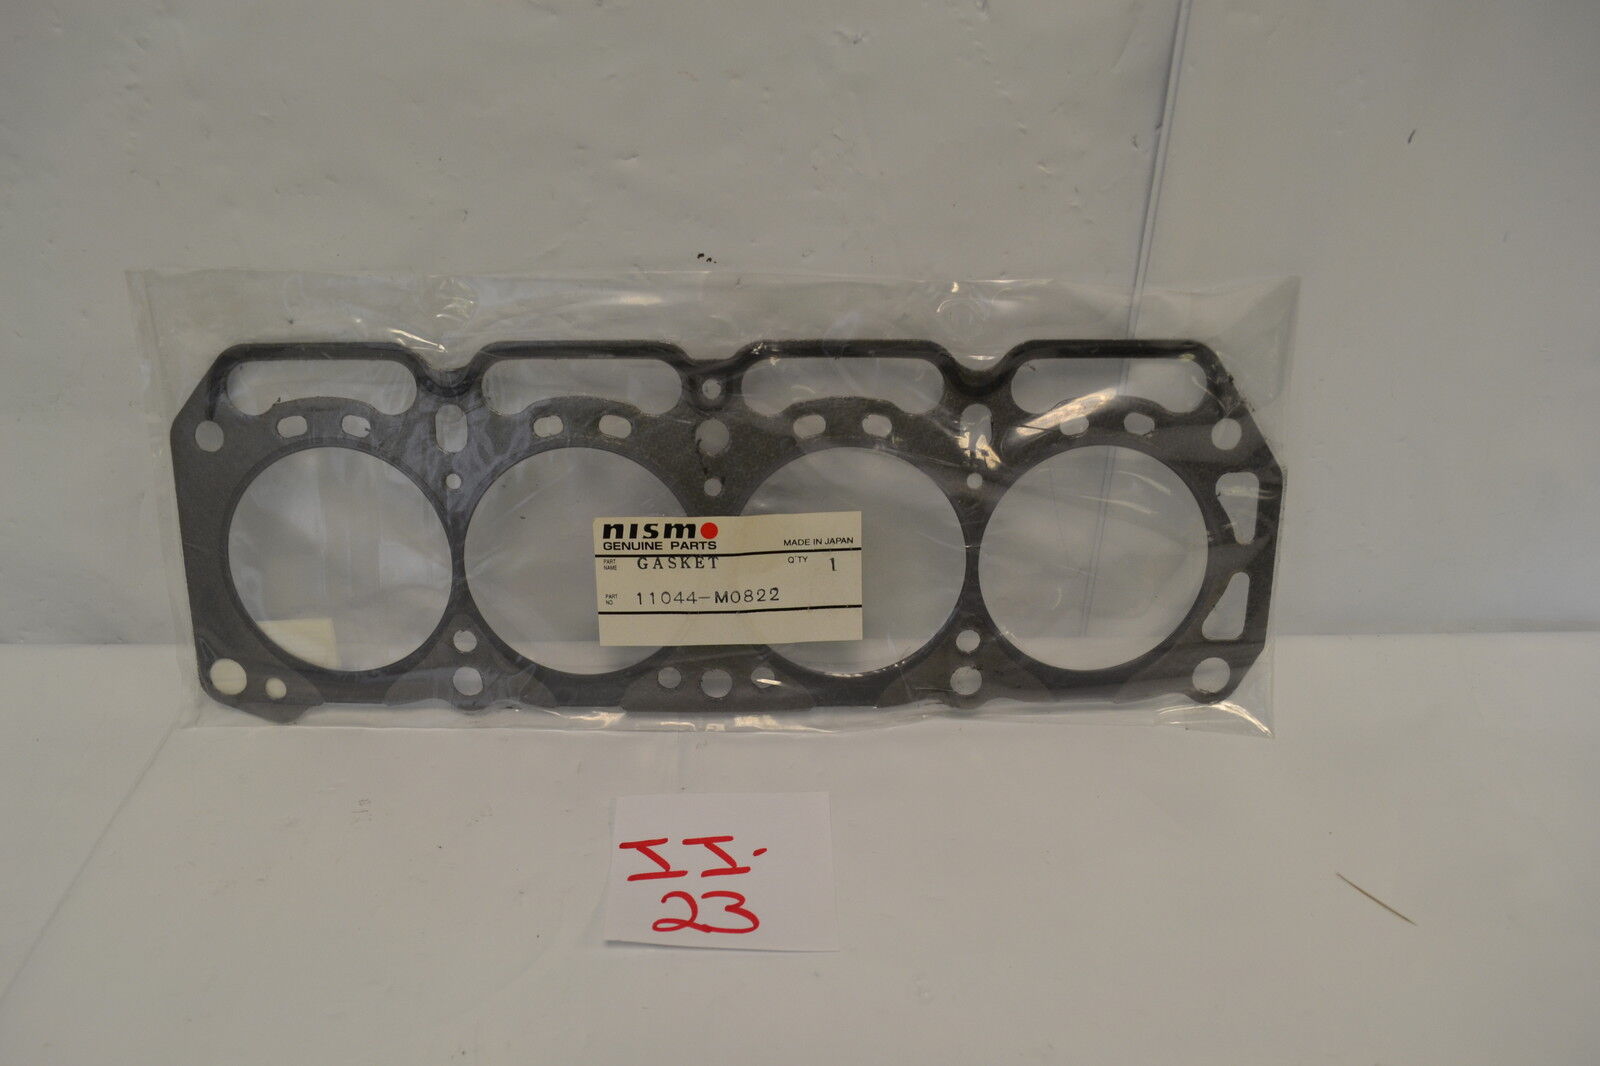 NEW OEM Datsun Nismo Head Gasket A12 A13 A14 A15 A-SERIES ENGINES 11044-M0822